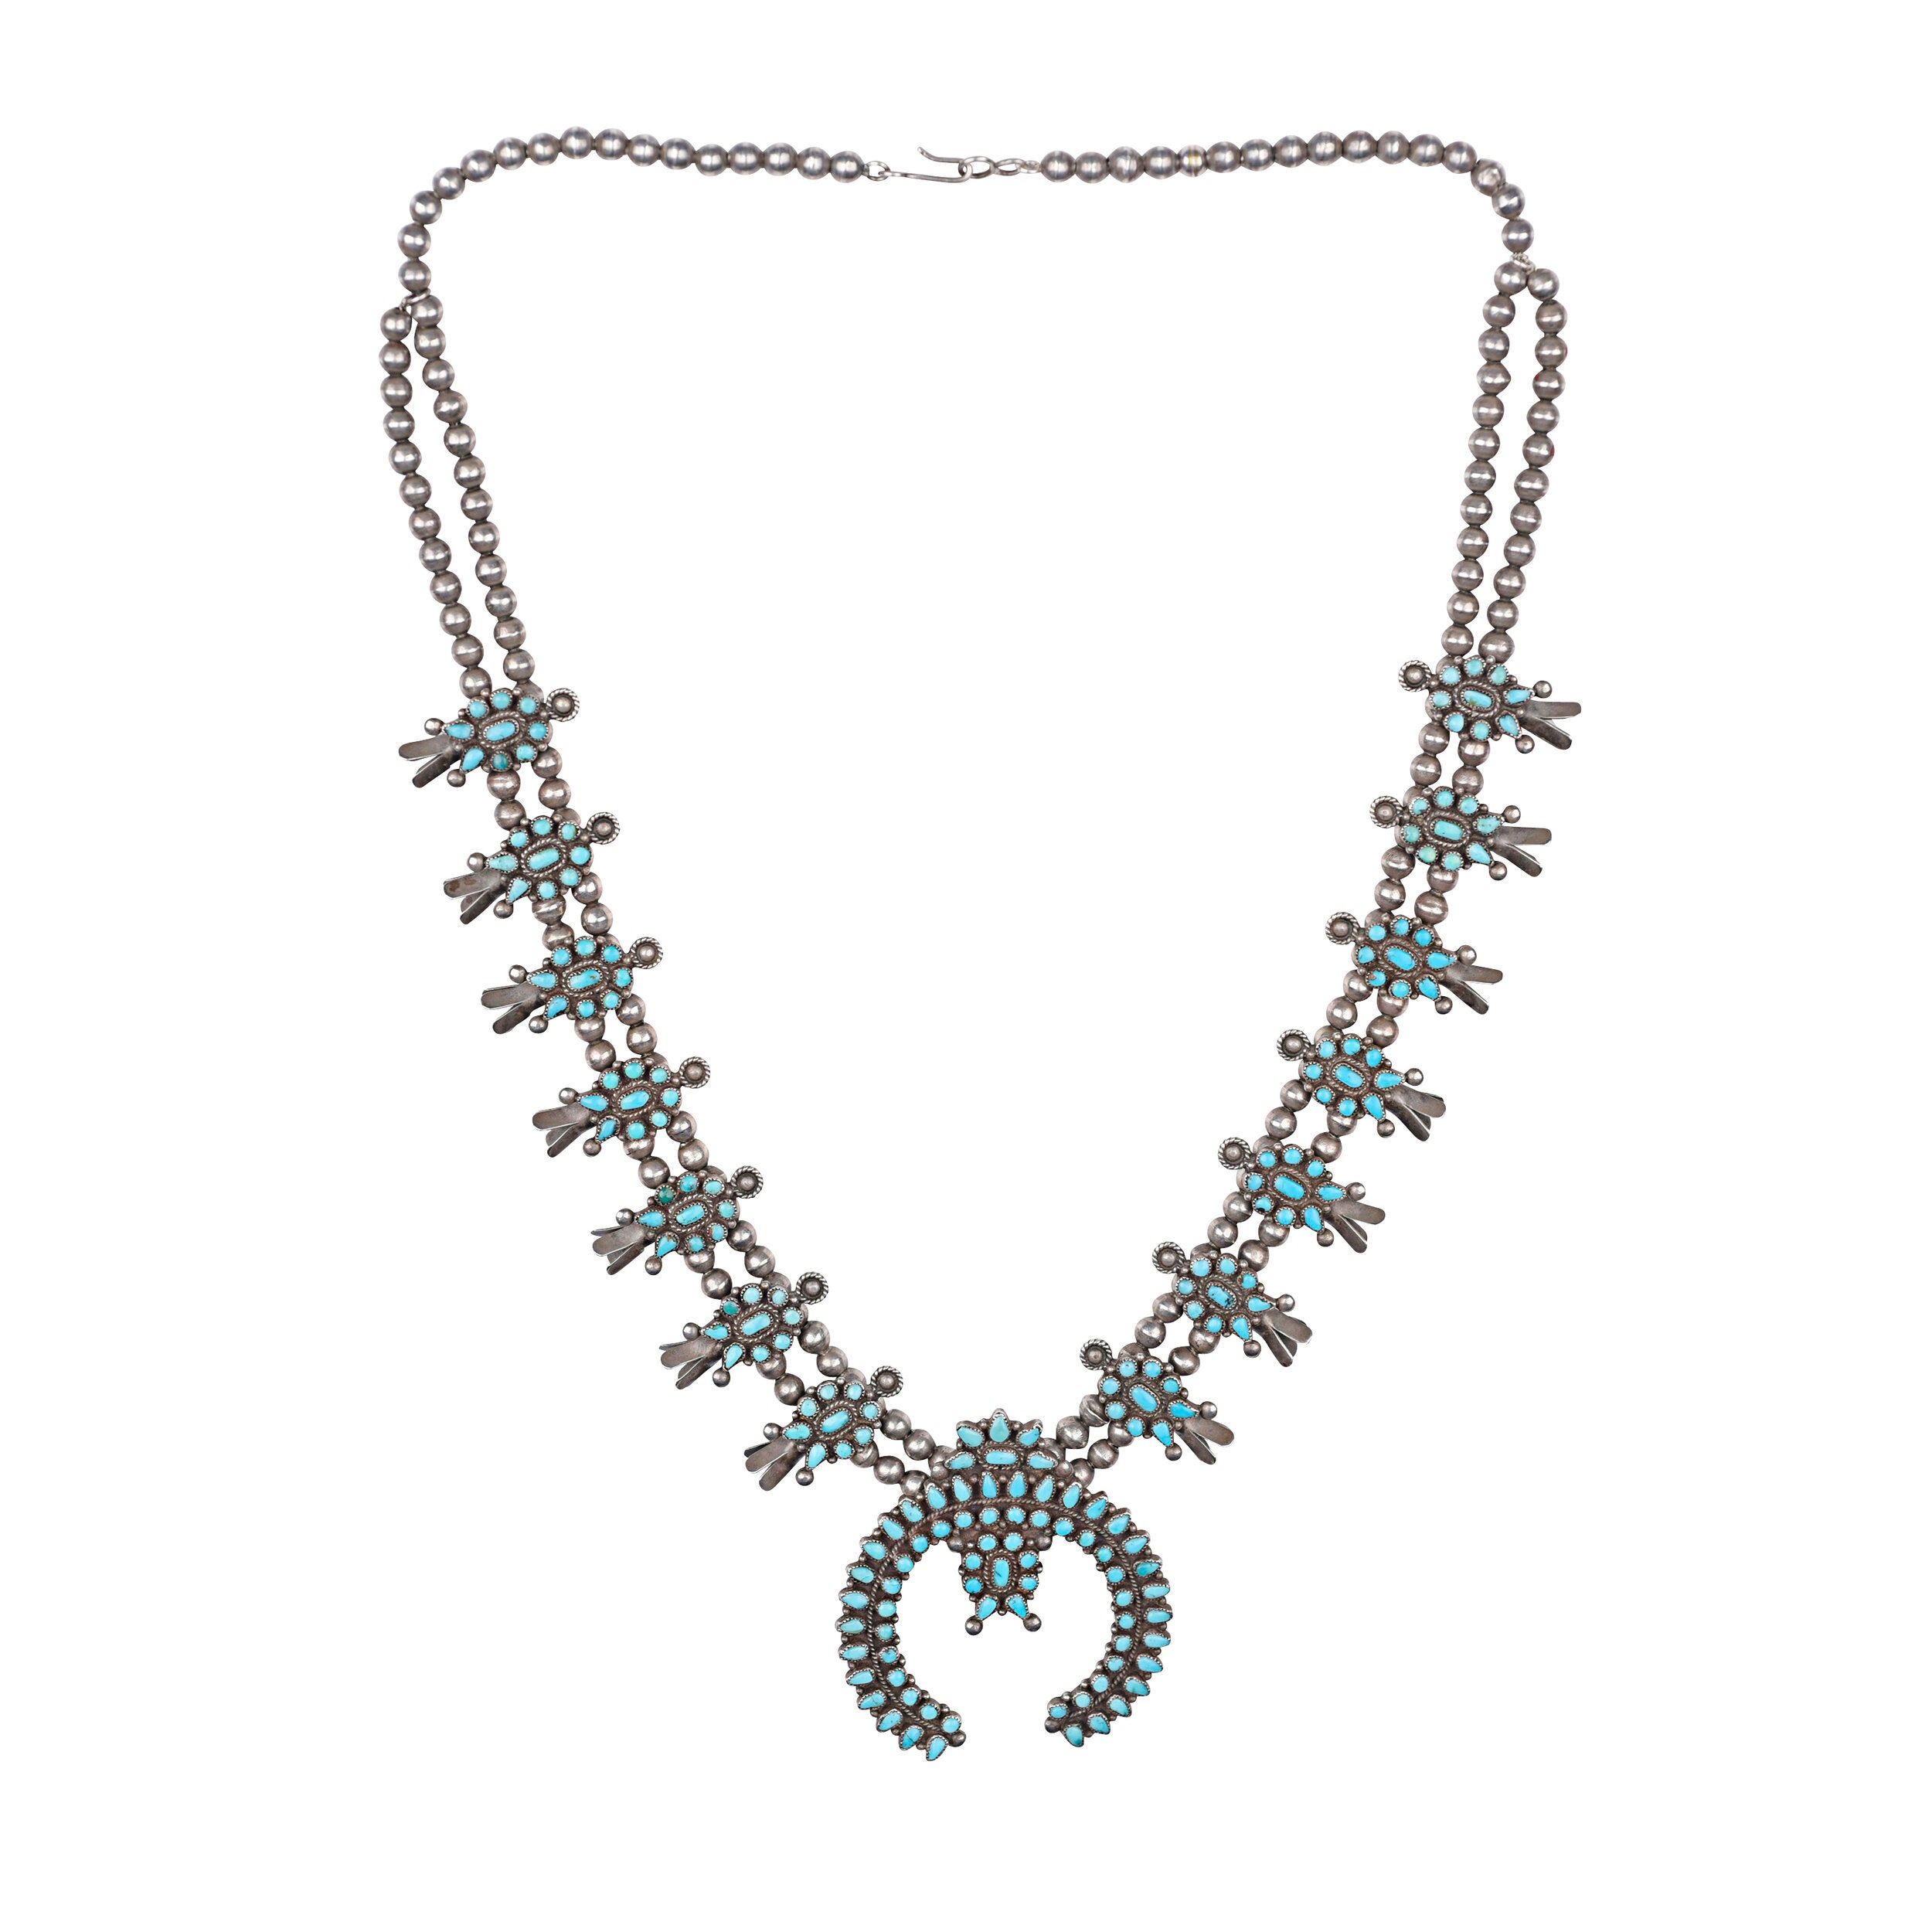 KREE BLANCHARD SLEEPING BEAUTY TURQUOISE SQUASH BLOSSOM NECKLACE SET –  Kittie K Ranch and Co